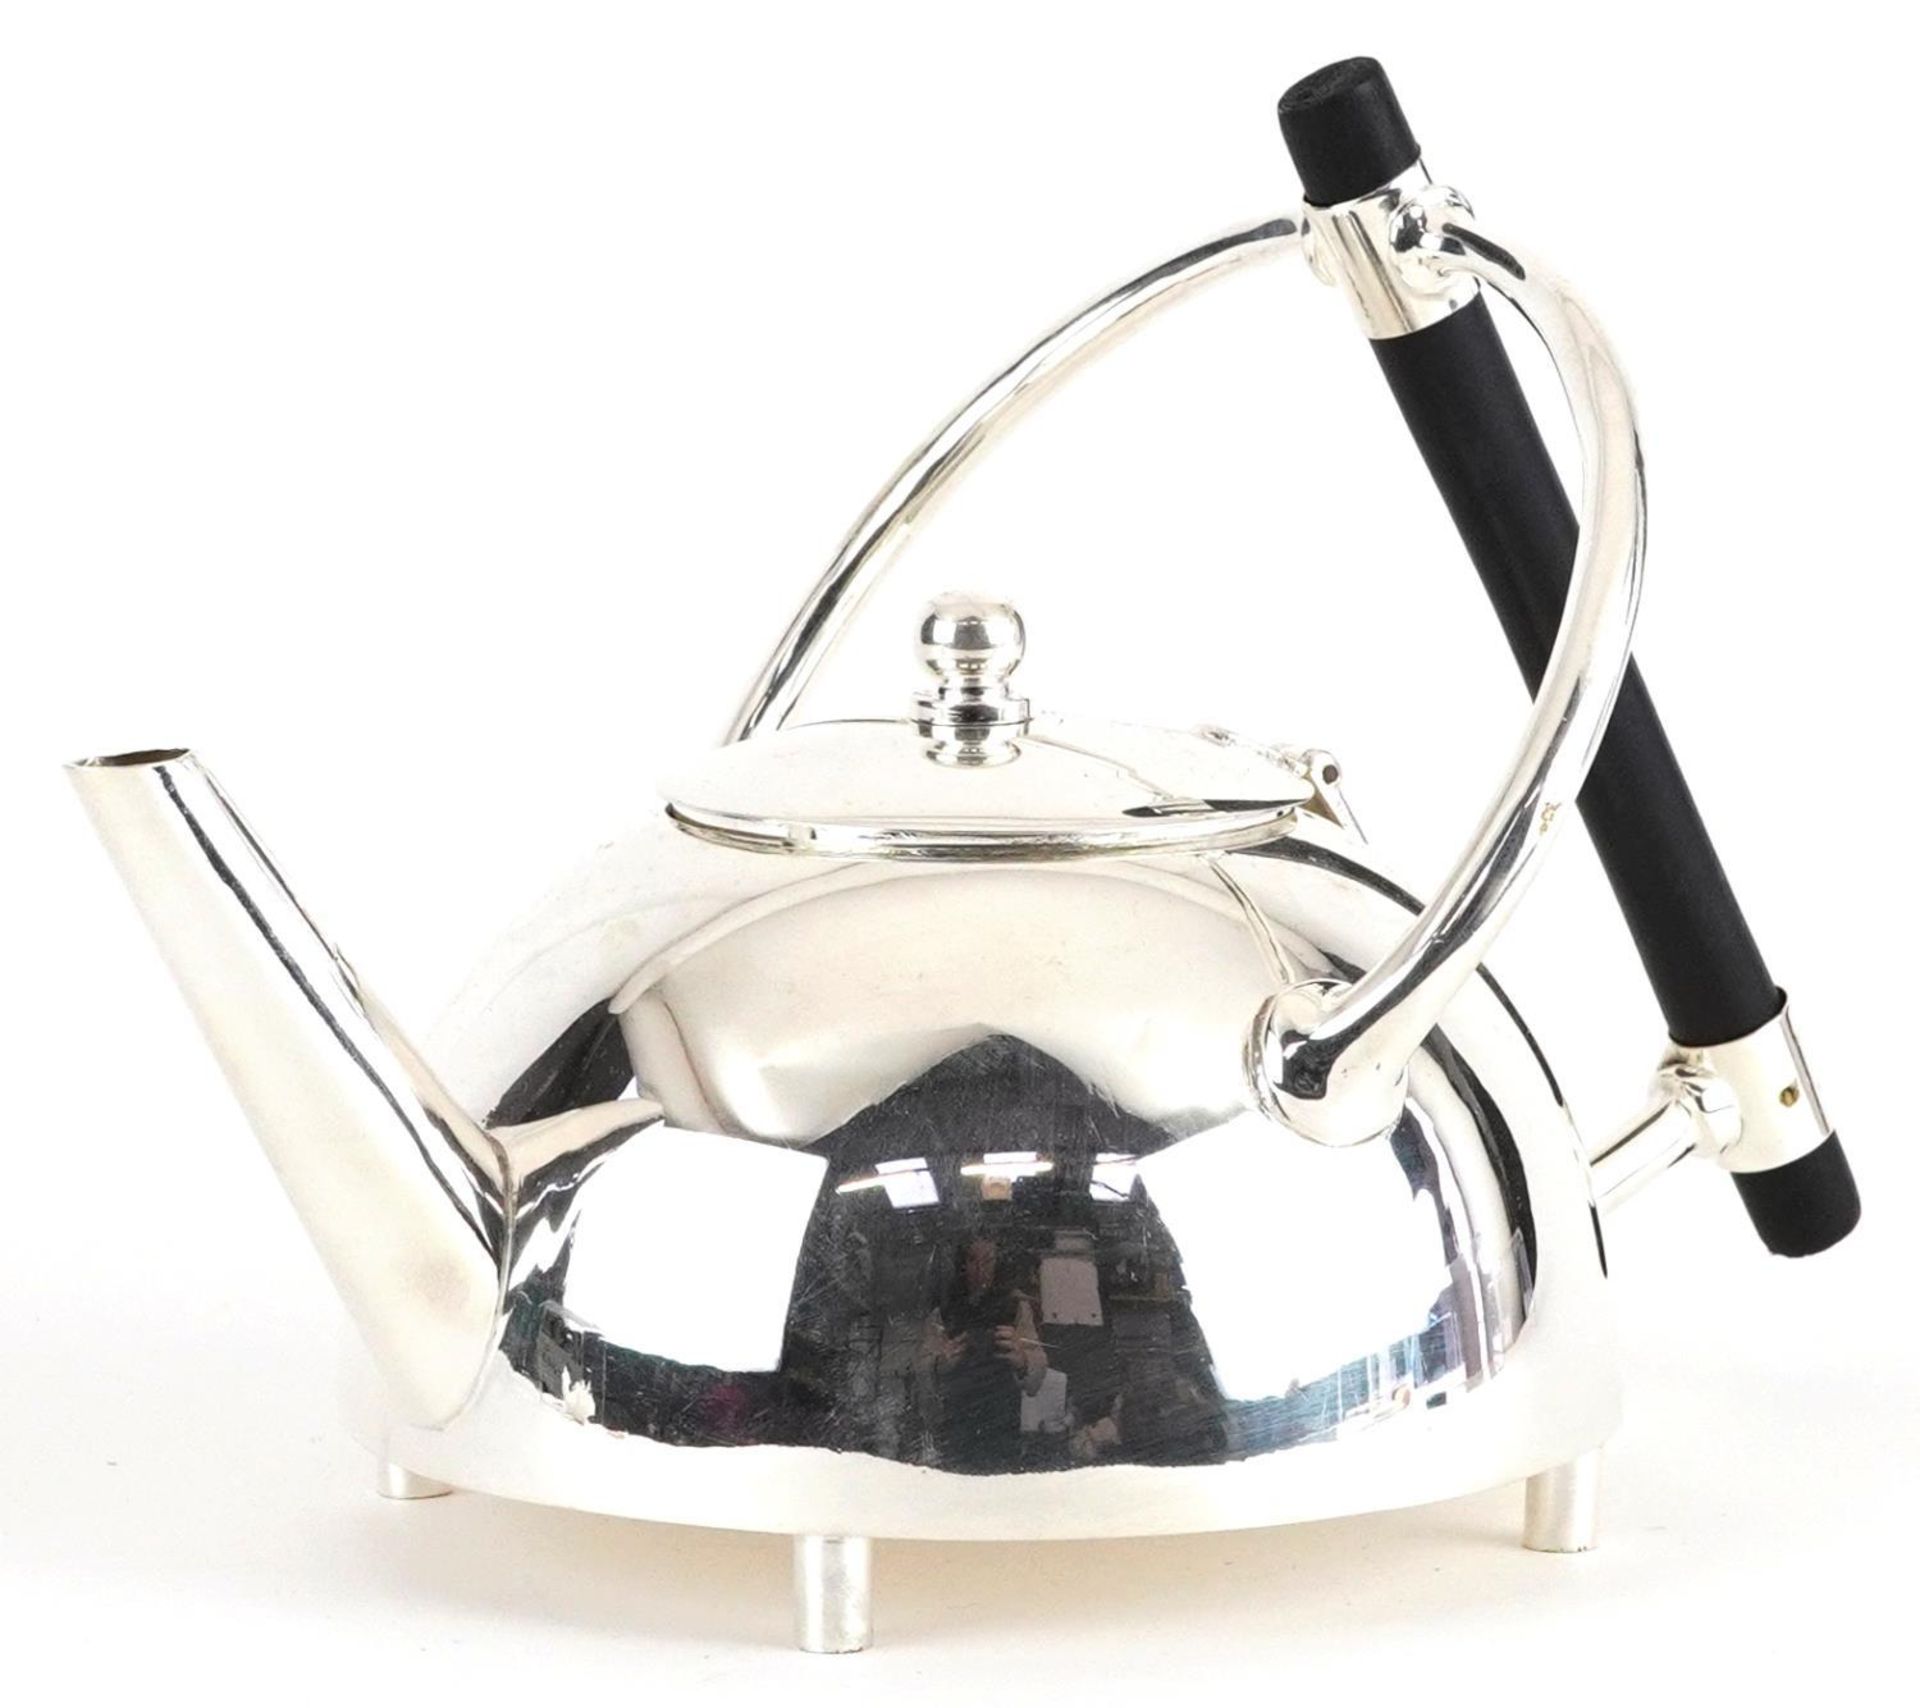 Modernist silver plated teapot with ebonised handle, 21.5cm in length : For further information on